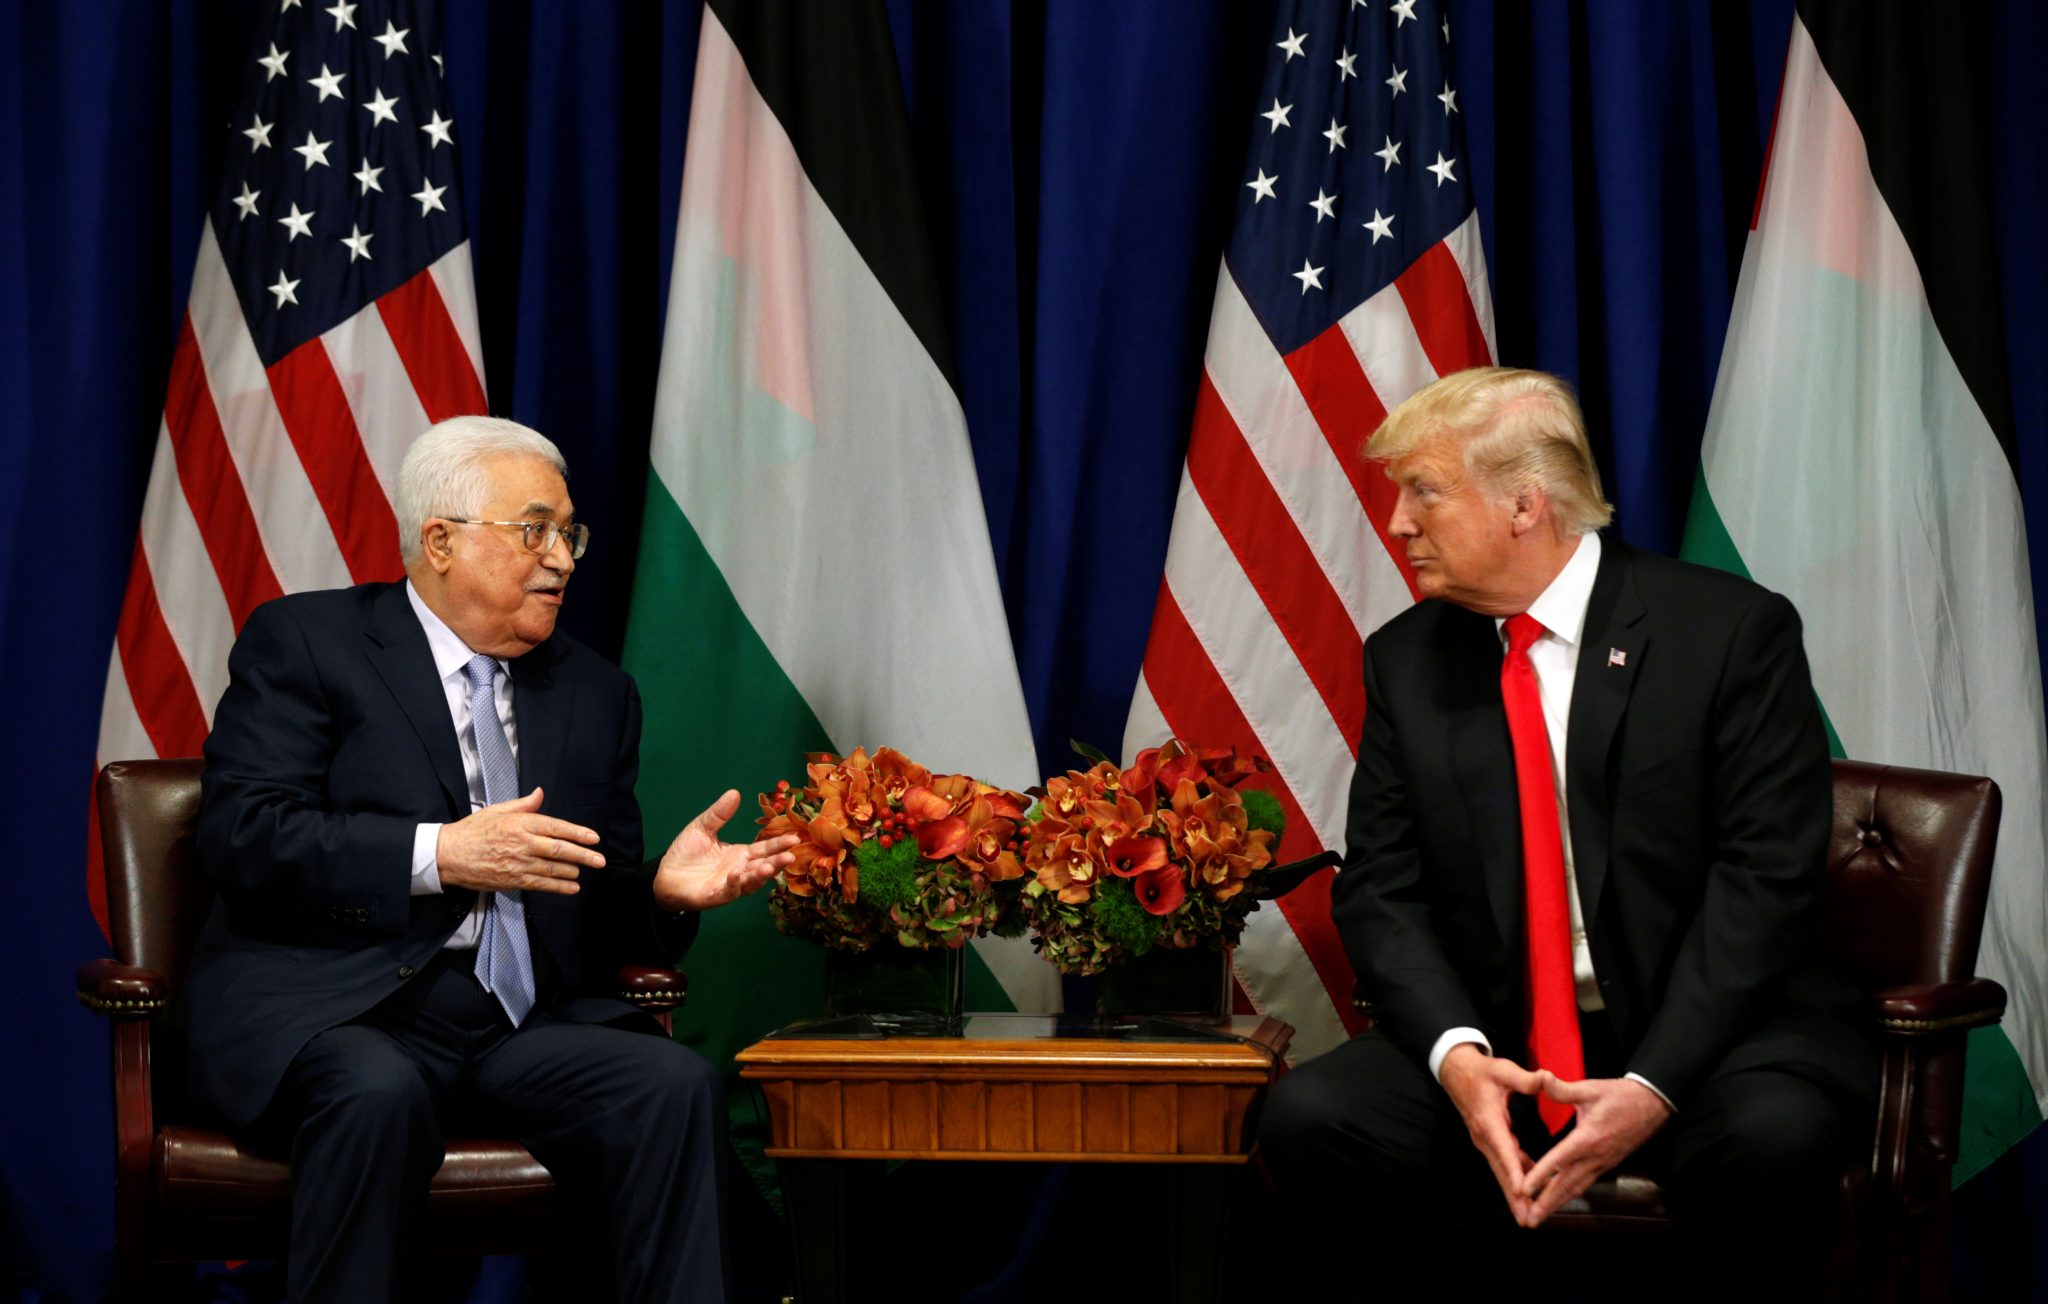 On backdrop of diplomatic and economic measures against the PA: U.S. President Donald Trump meets with Palestinian President Mahmoud Abbas during the U.N. General Assembly in New York, U.S., September 20, 2017. REUTERS/Kevin Lamarque - RC1BCBBBAA10